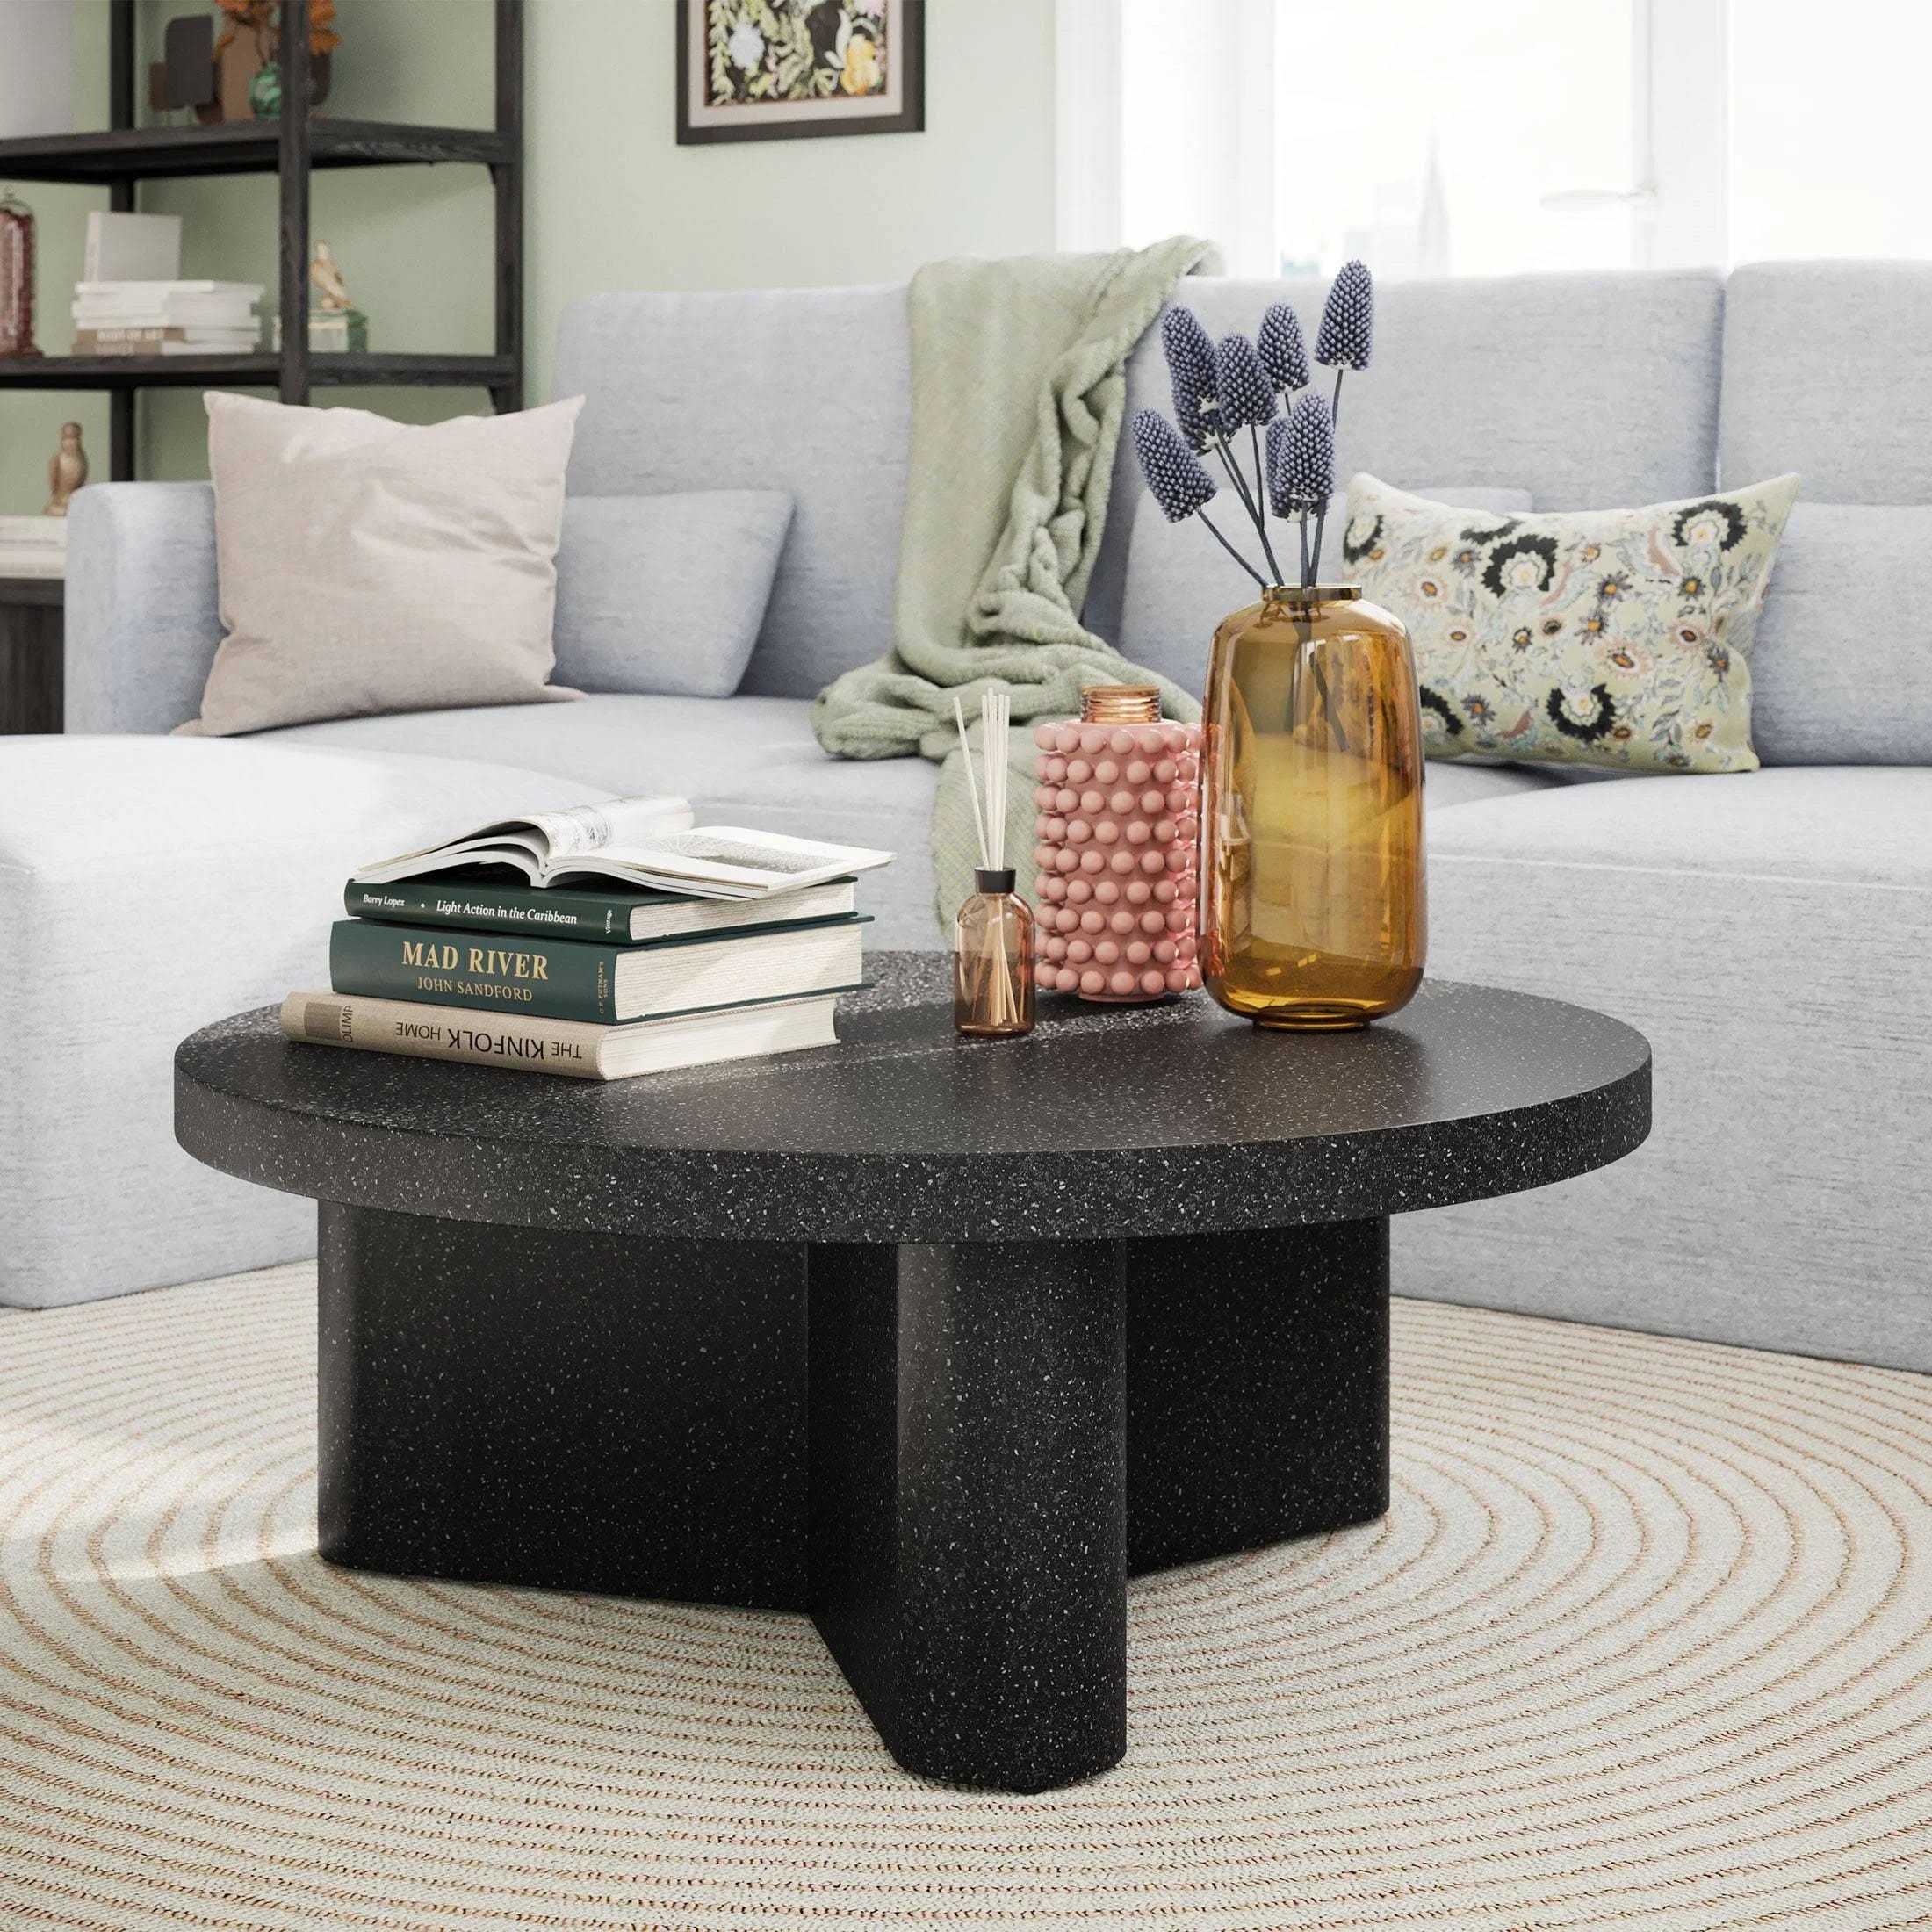 Drew Barrymore's Modern Round Coffee Table with Marble Finish | Image